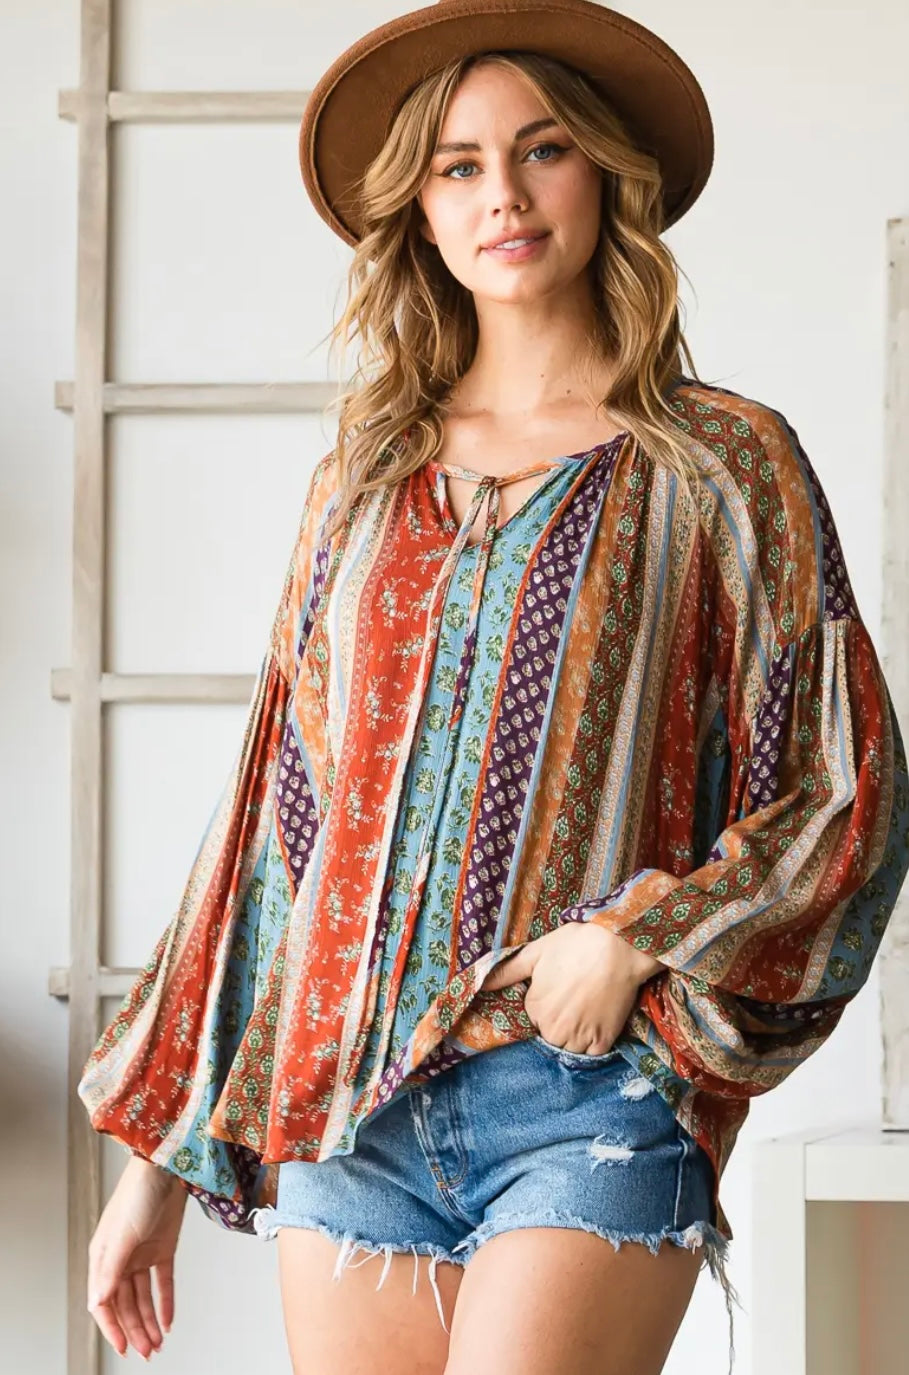 How To Style Boho Tops. Boho tops are a must-have for any…